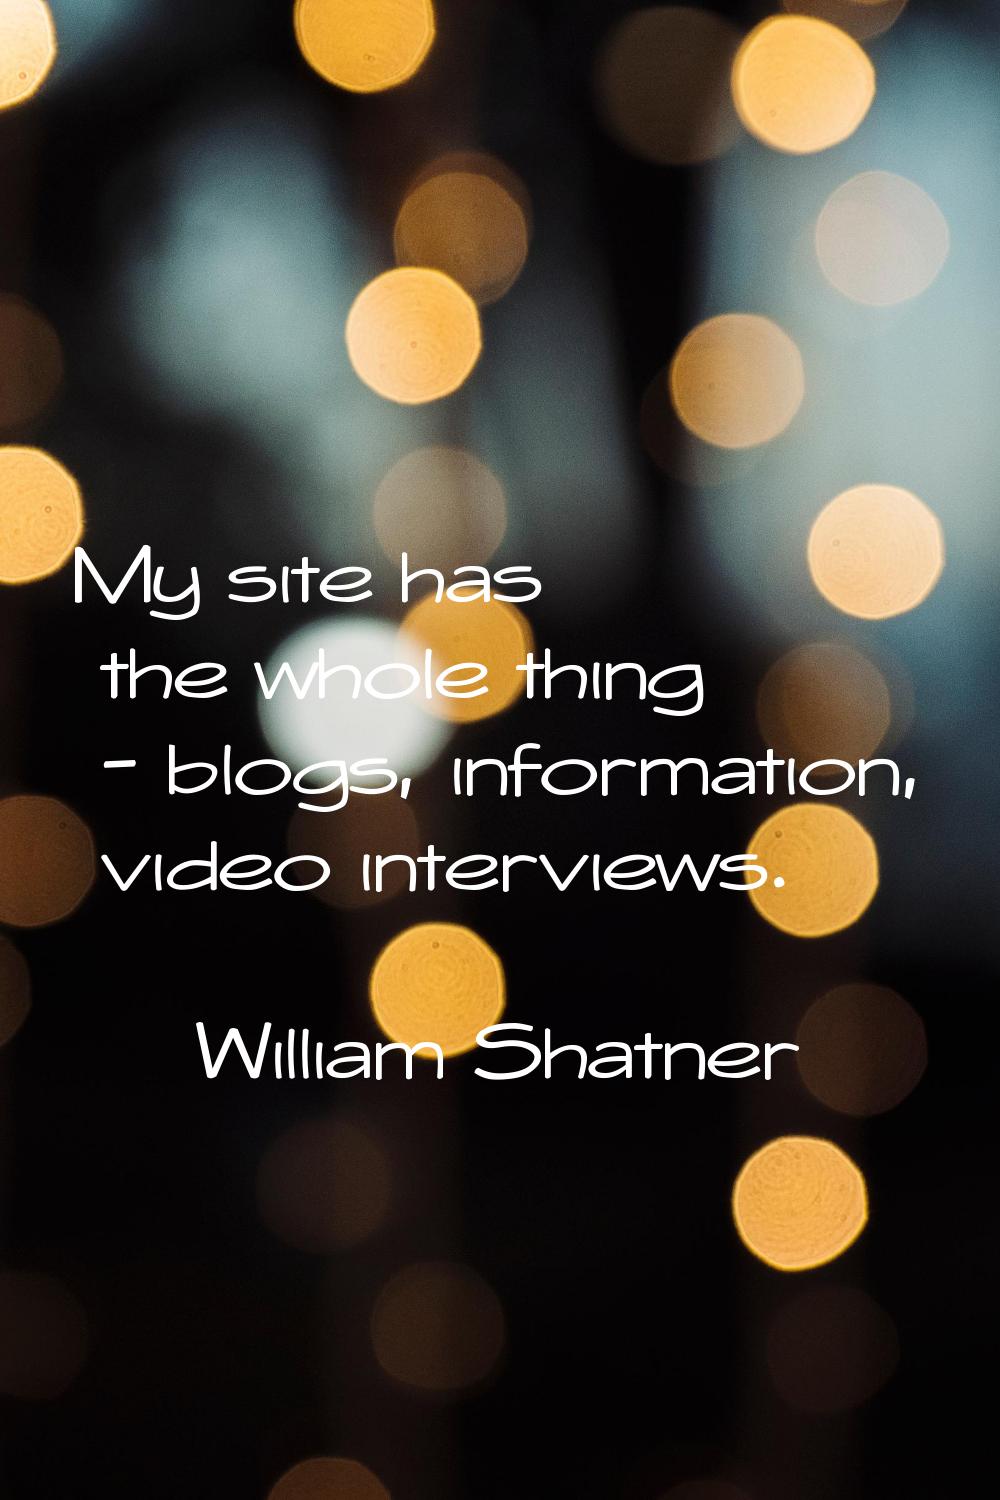 My site has the whole thing - blogs, information, video interviews.